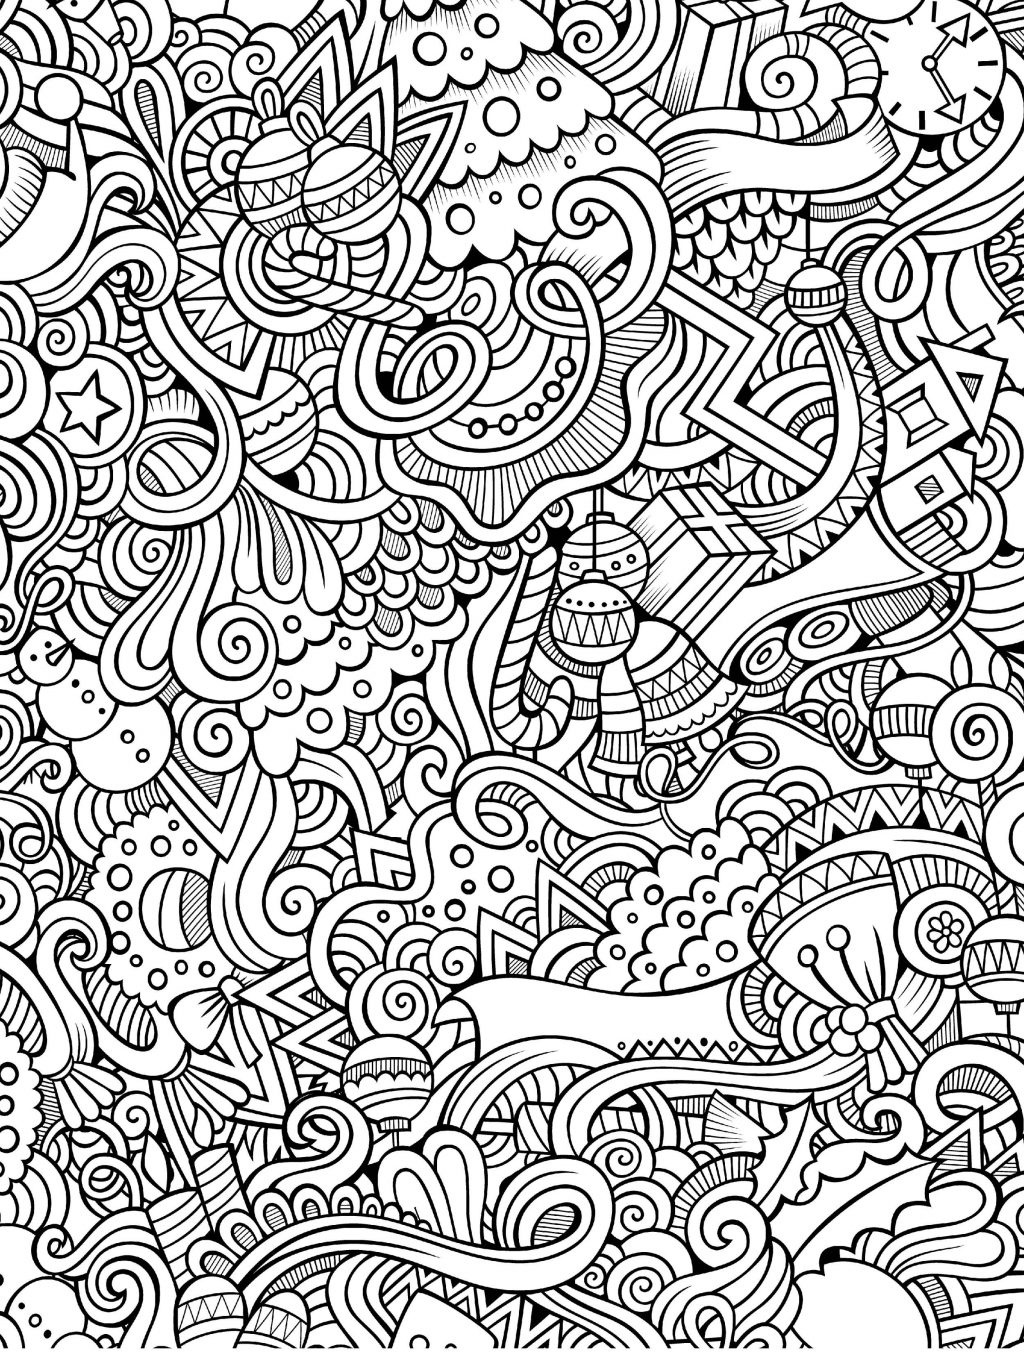 Coloring Page ~ Free Printable Trippy Colorings Wuming Me Marvelous - Free Printable Trippy Coloring Pages